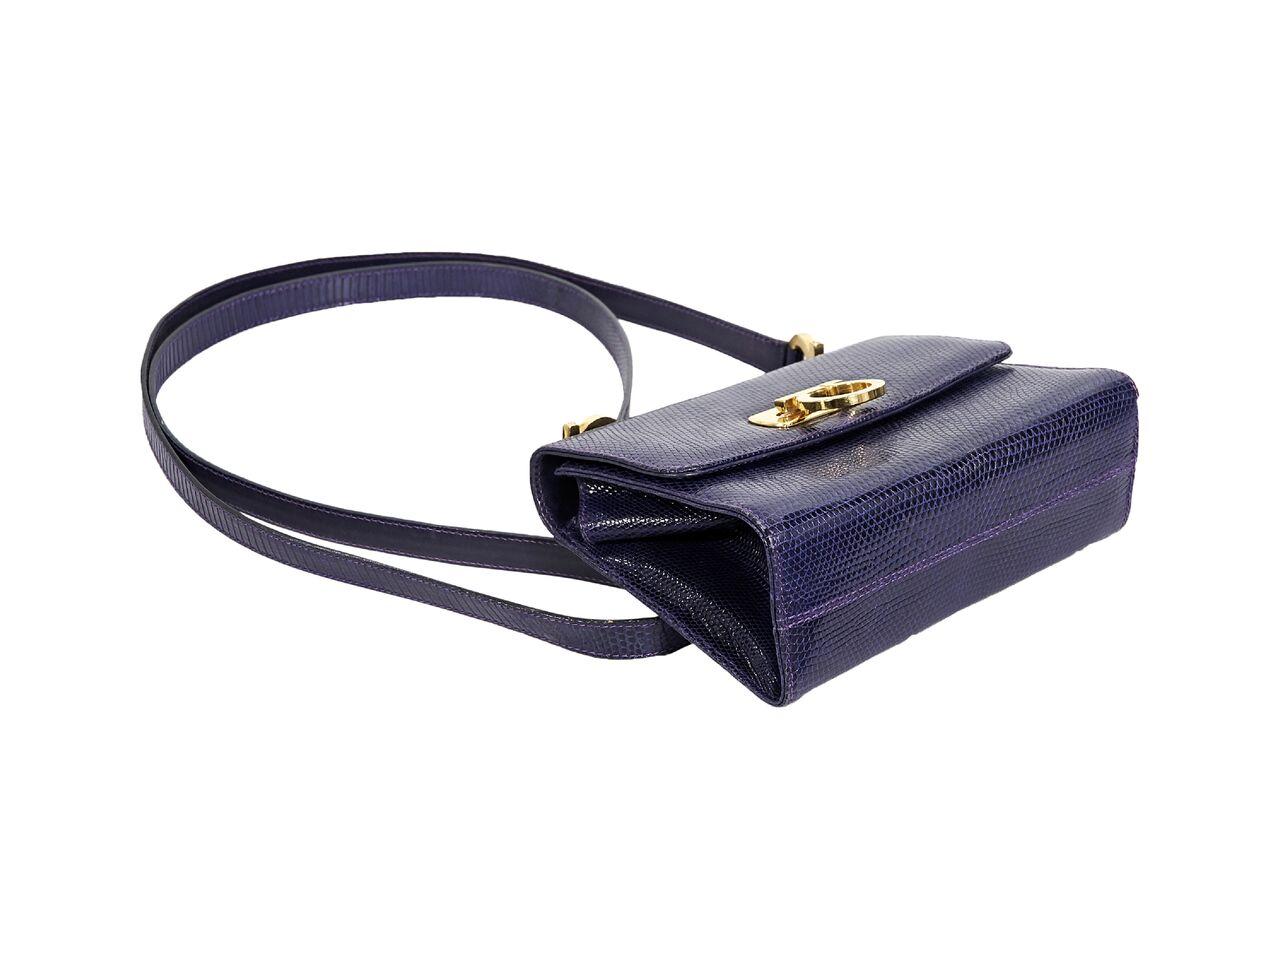 Product details:  Purple lizard crossbody bag by Salvatore Ferragamo.  Single crossbody strap.  Front flap with flip-lock closure.  Lined interior with inner slide pocket.  Goldtone hardware.  6.25